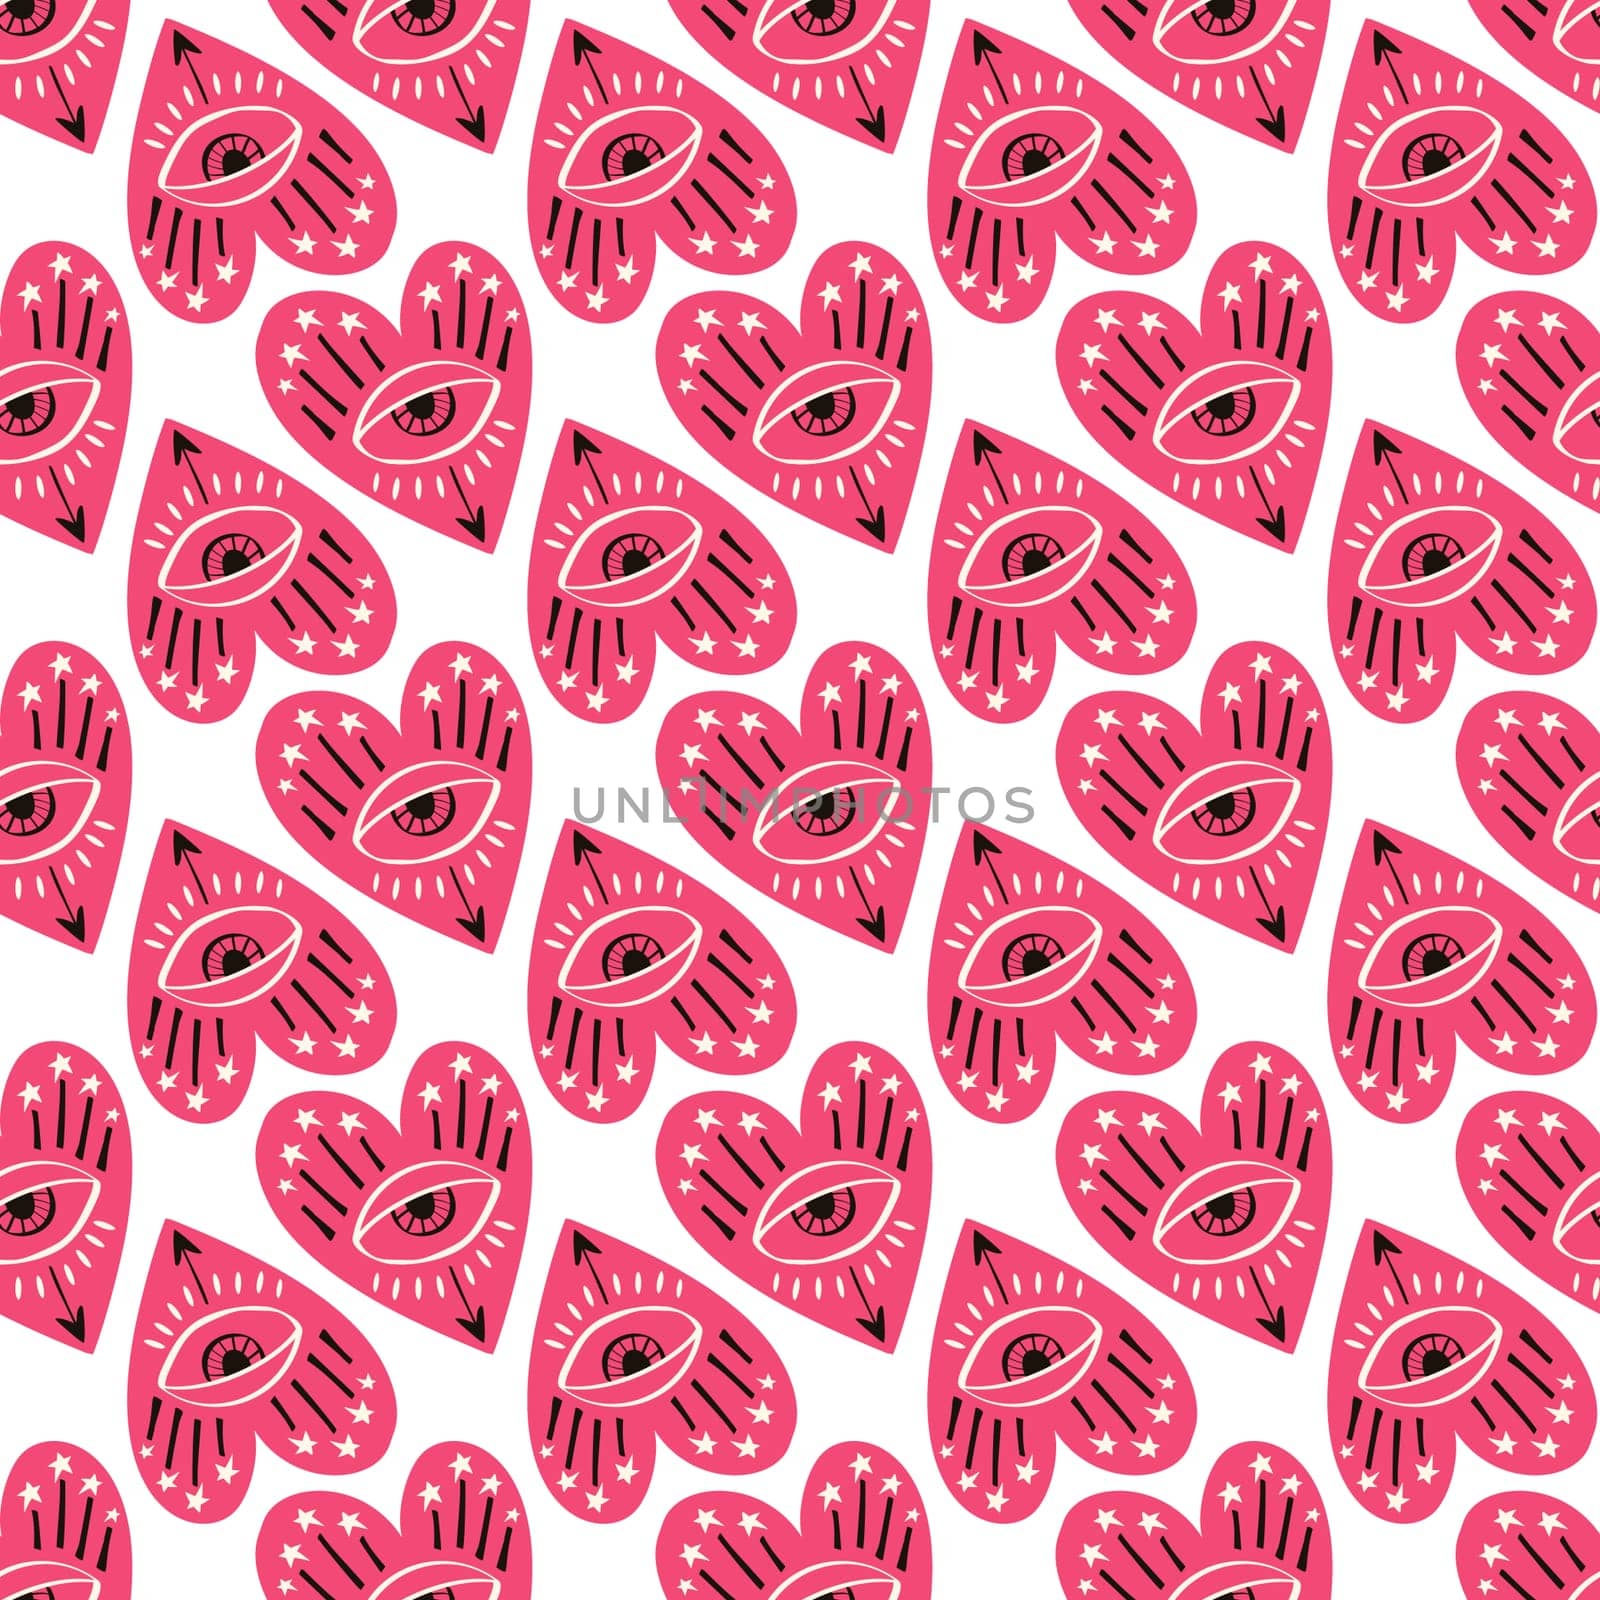 Beige and pink Valentines Day seamless pattern with magical hearts. Valentine background by Dustick